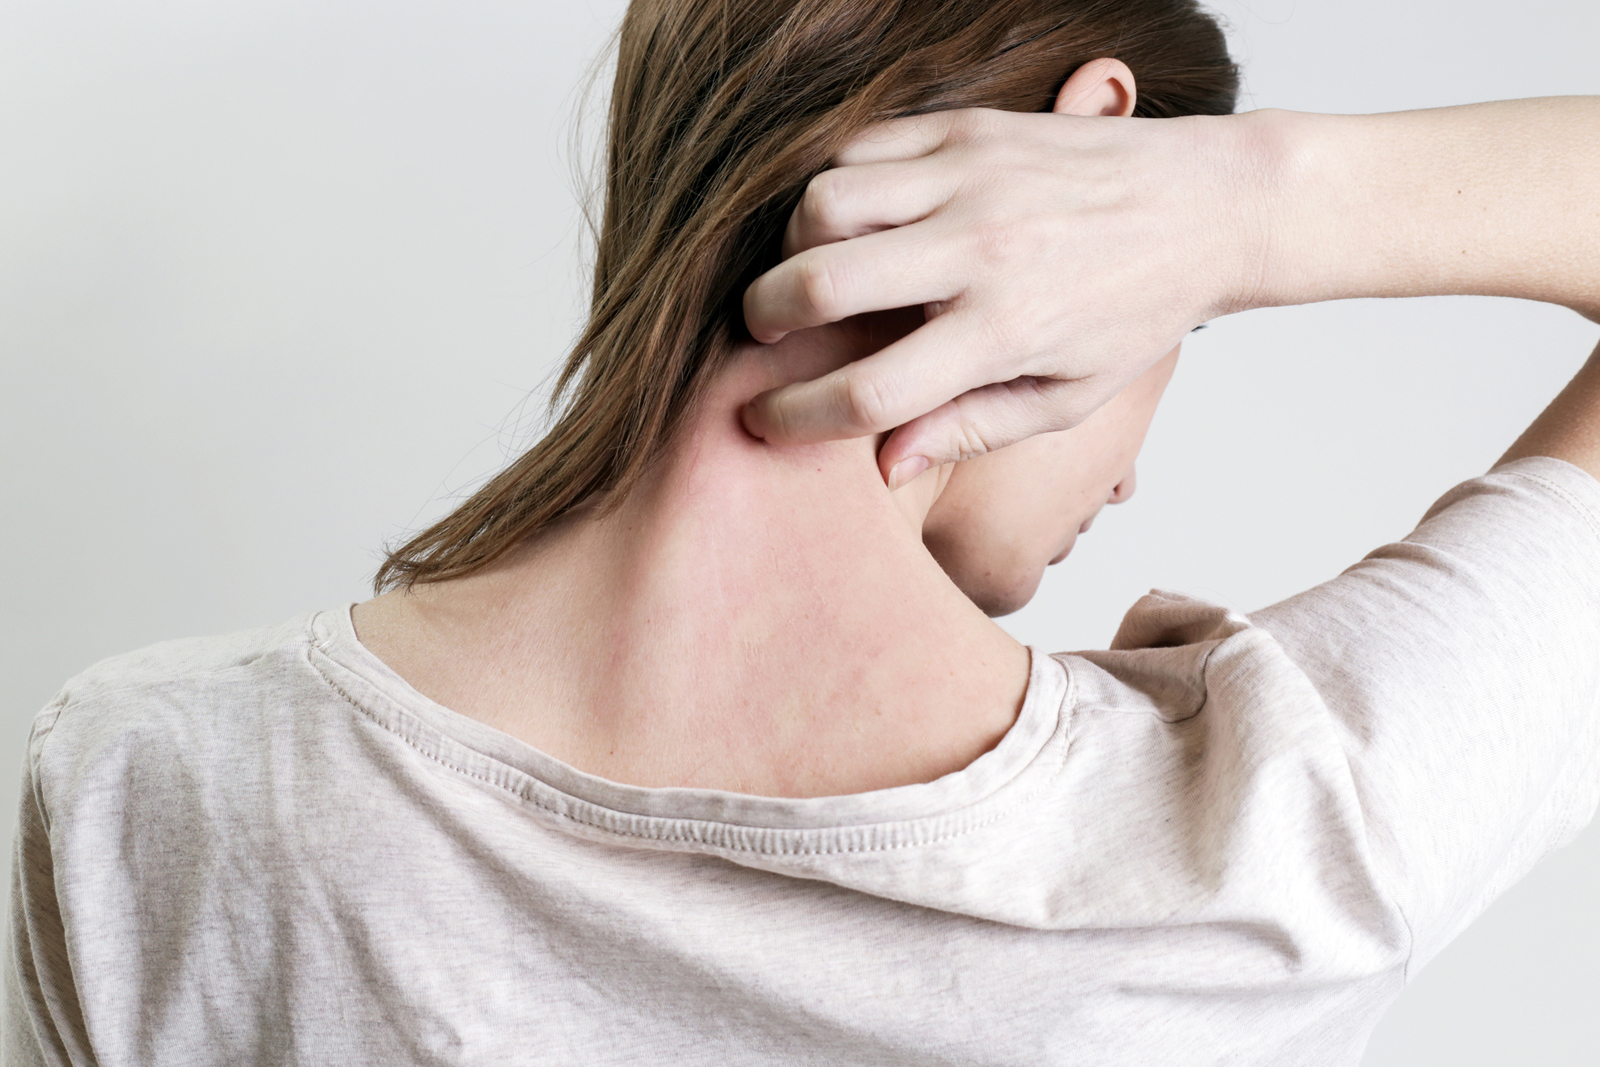 Close up view of woman scratching her neck.